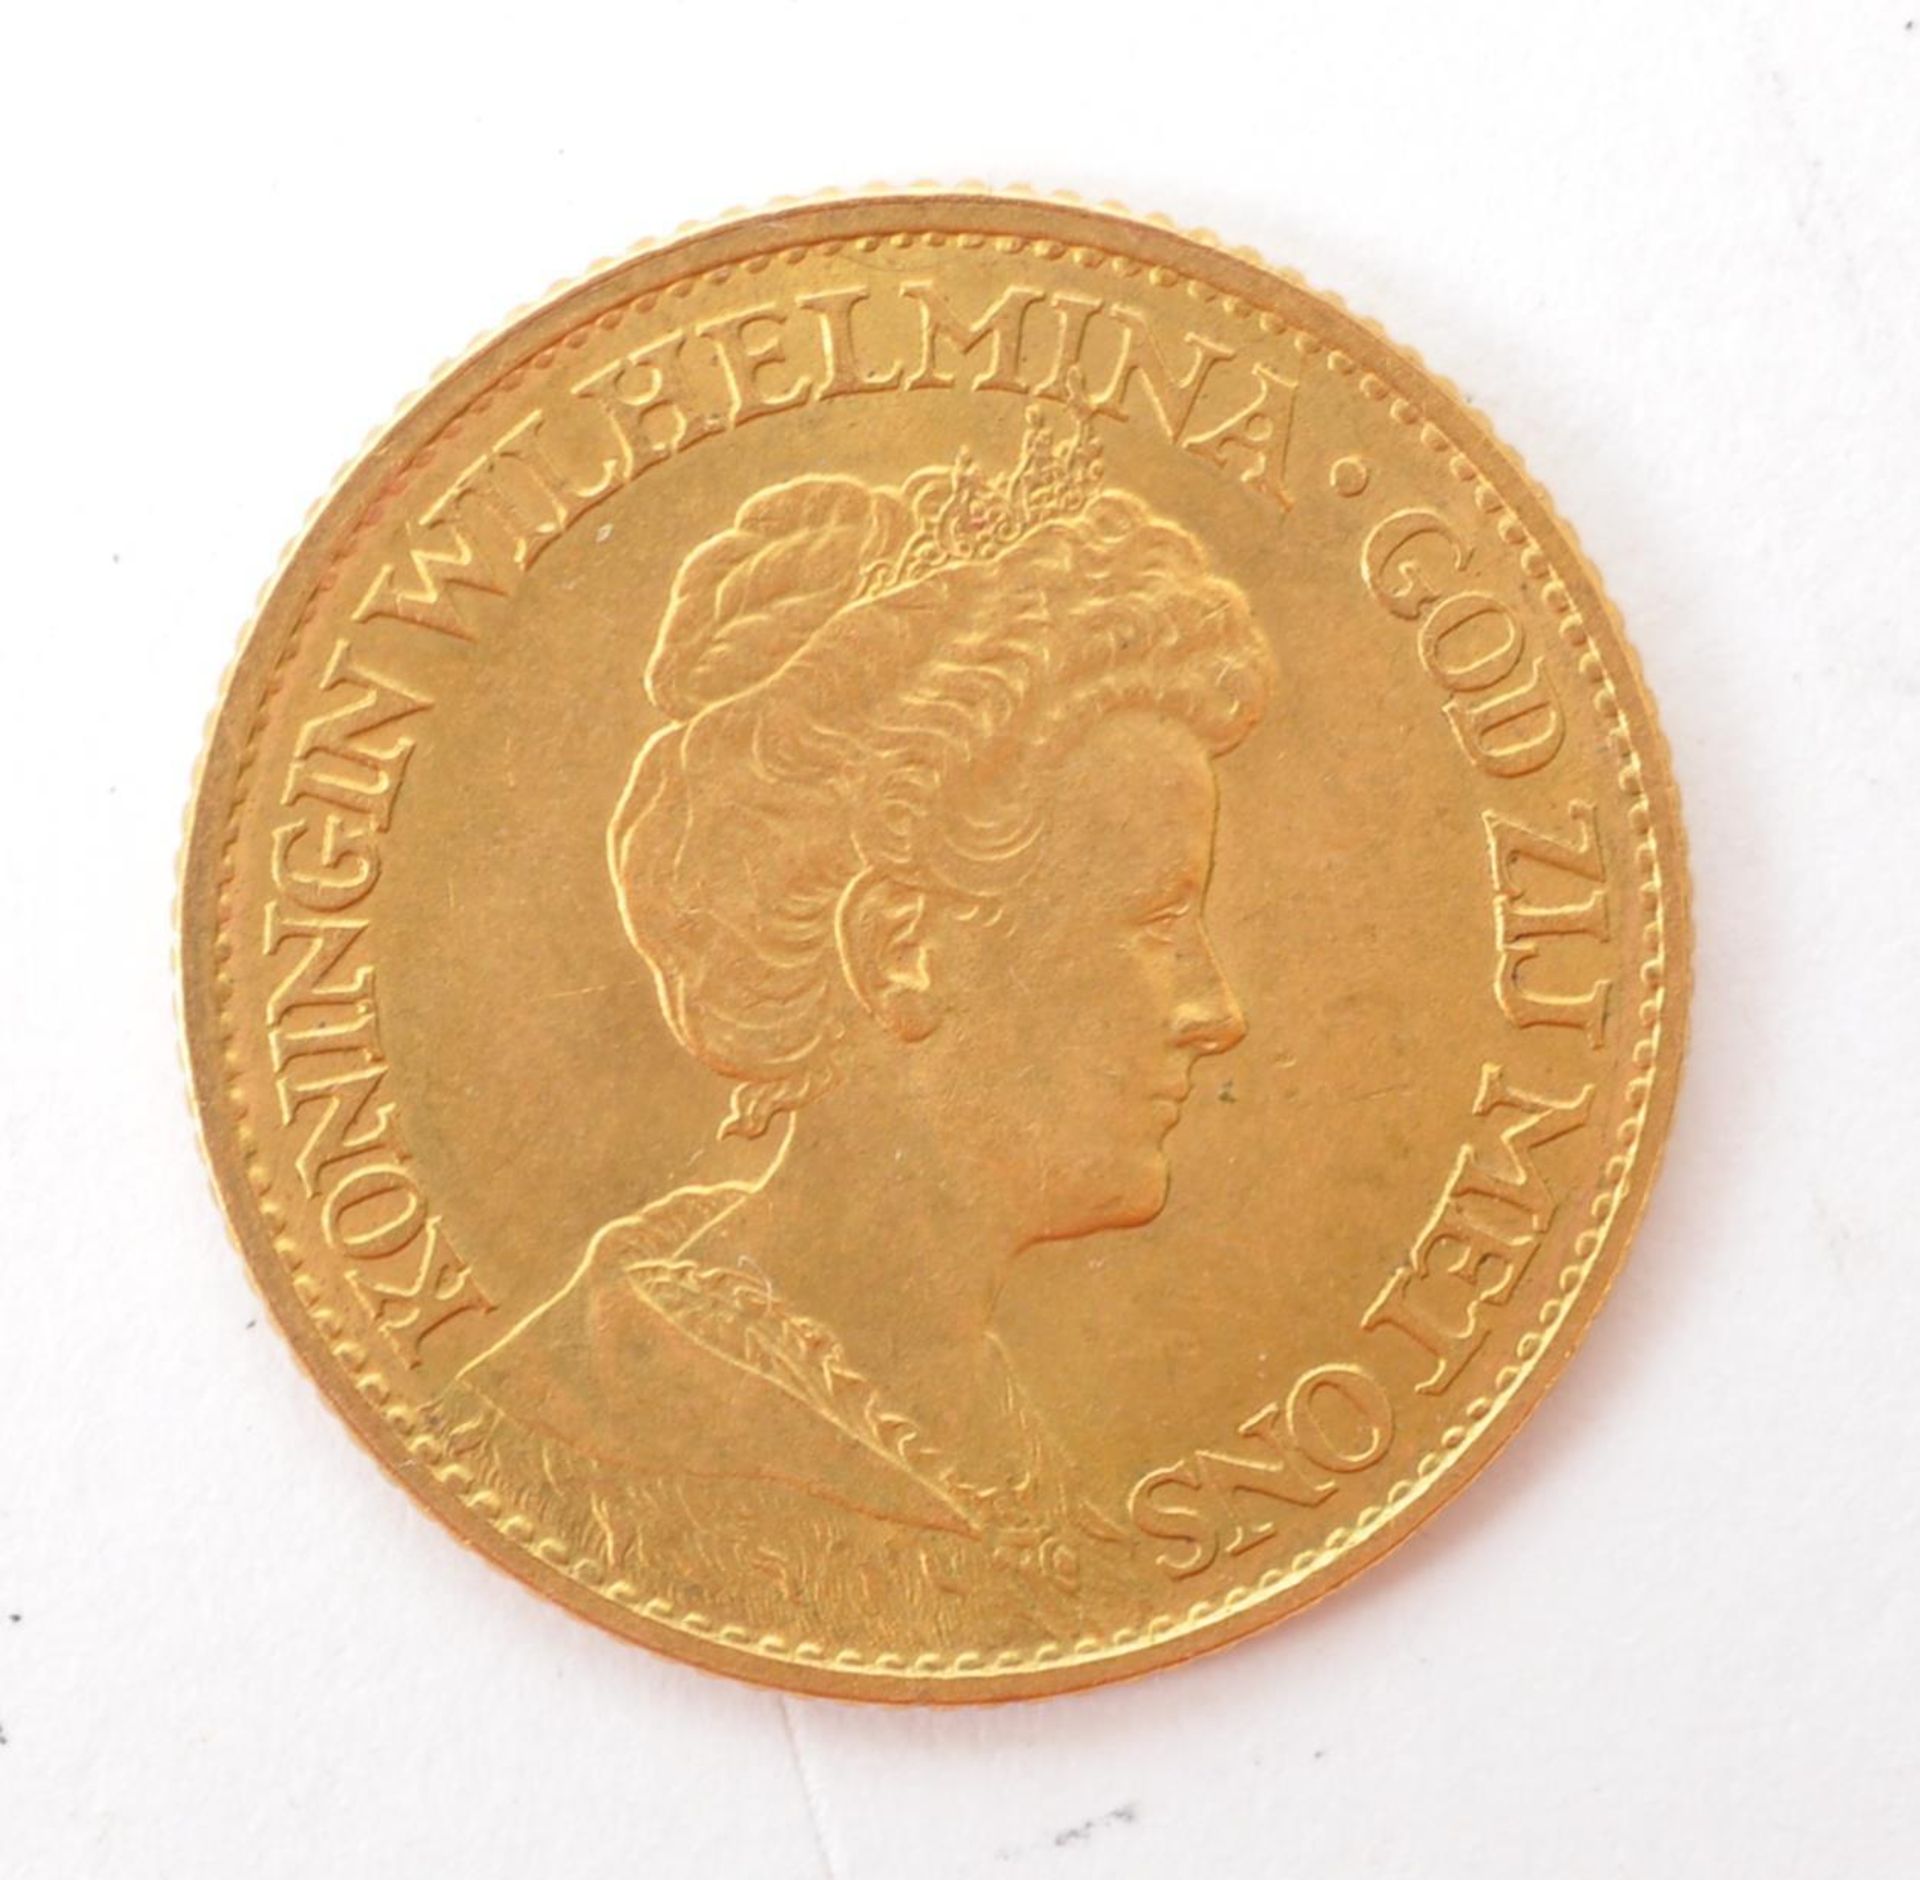 ROYAL DUTCH MINT - EARLY 20TH CENTURY 10 GUILDER GOLD COIN